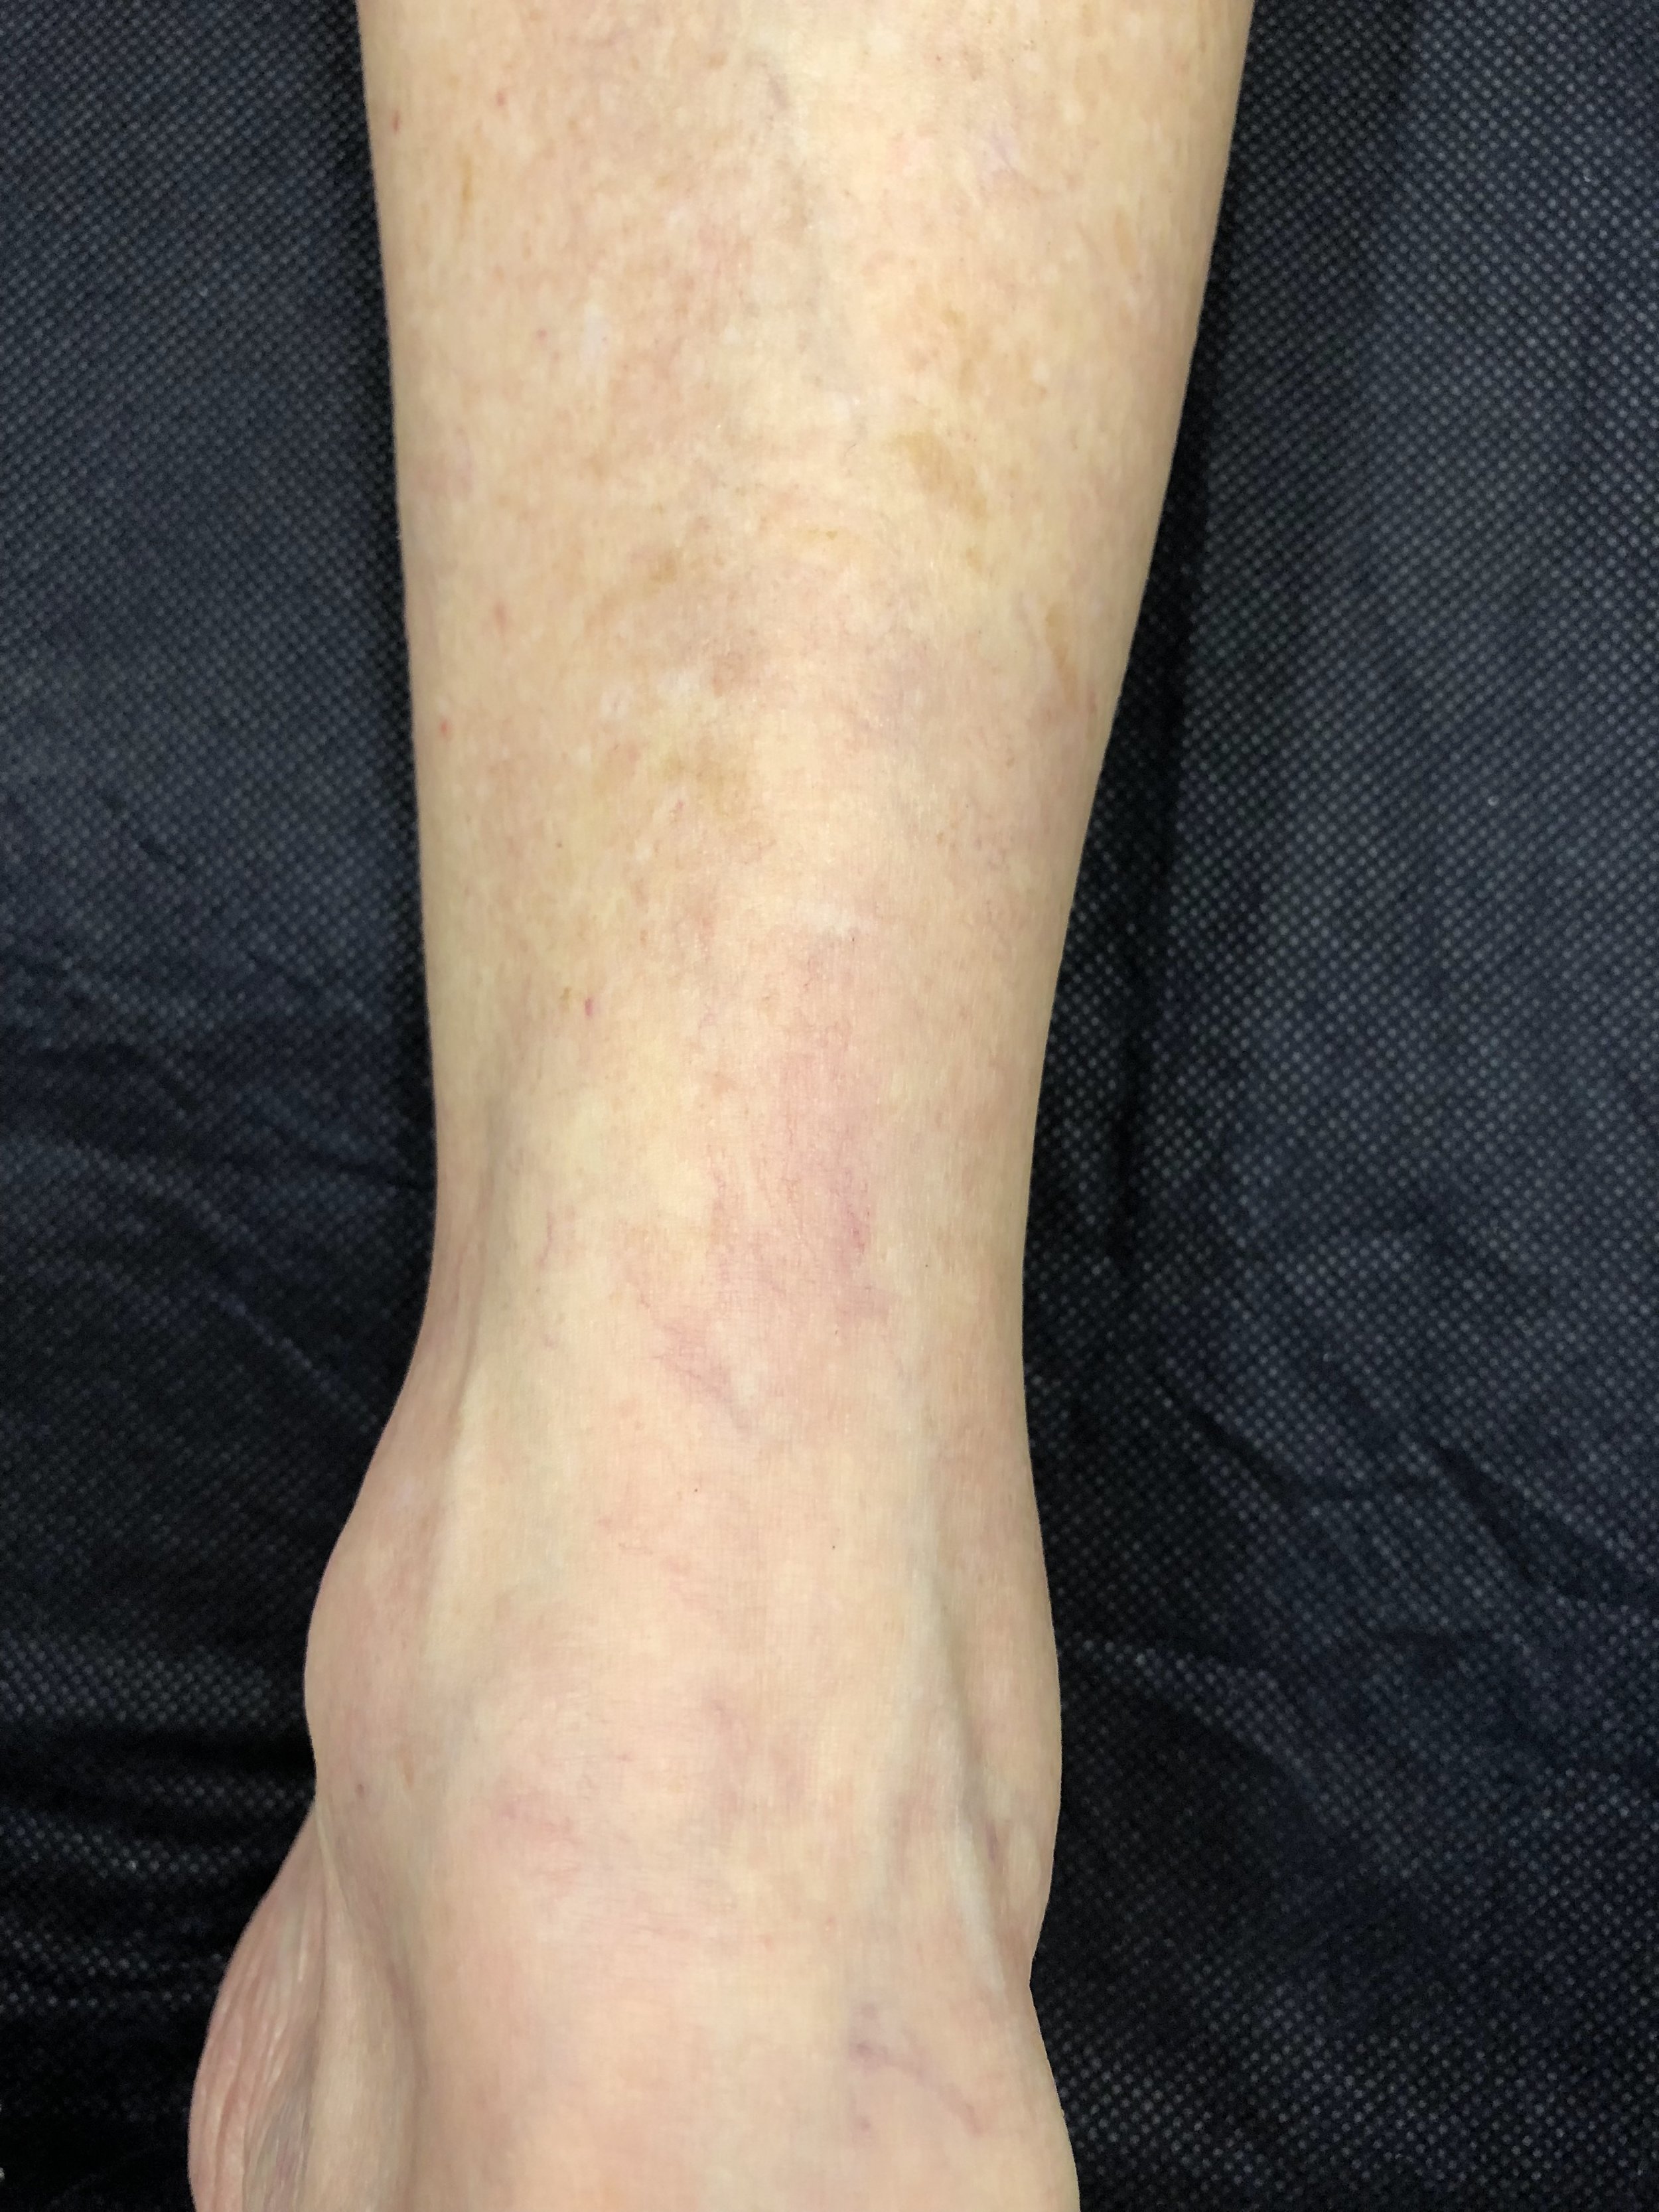  After - 3 months. Sclerotherapy 2 treatments 